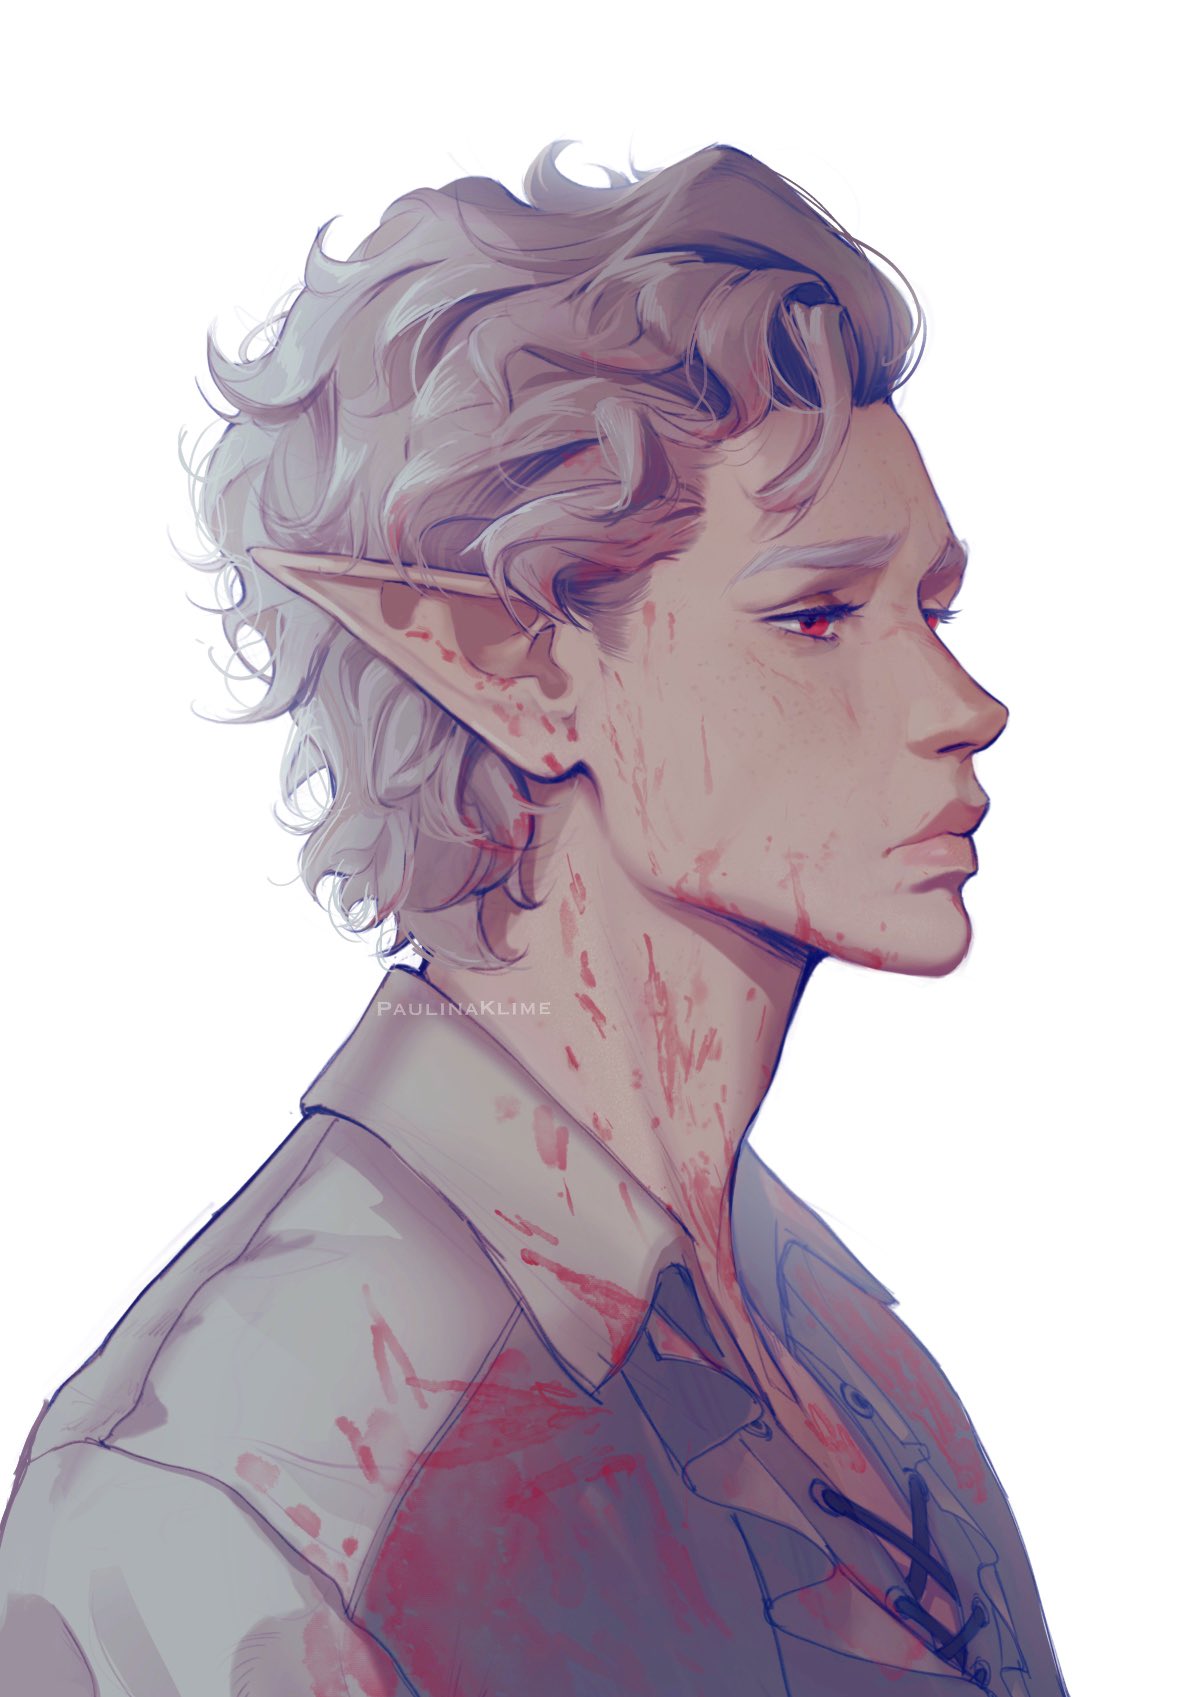 1boy astarion_(baldur's_gate) baldur's_gate baldur's_gate_3 blood blood_on_clothes blood_on_face blouse closed_mouth dungeons_and_dragons from_side grey_hair grey_shirt highres male_focus paulina_klime pointy_ears profile red_eyes sad shirt short_hair simple_background solo upper_body white_background